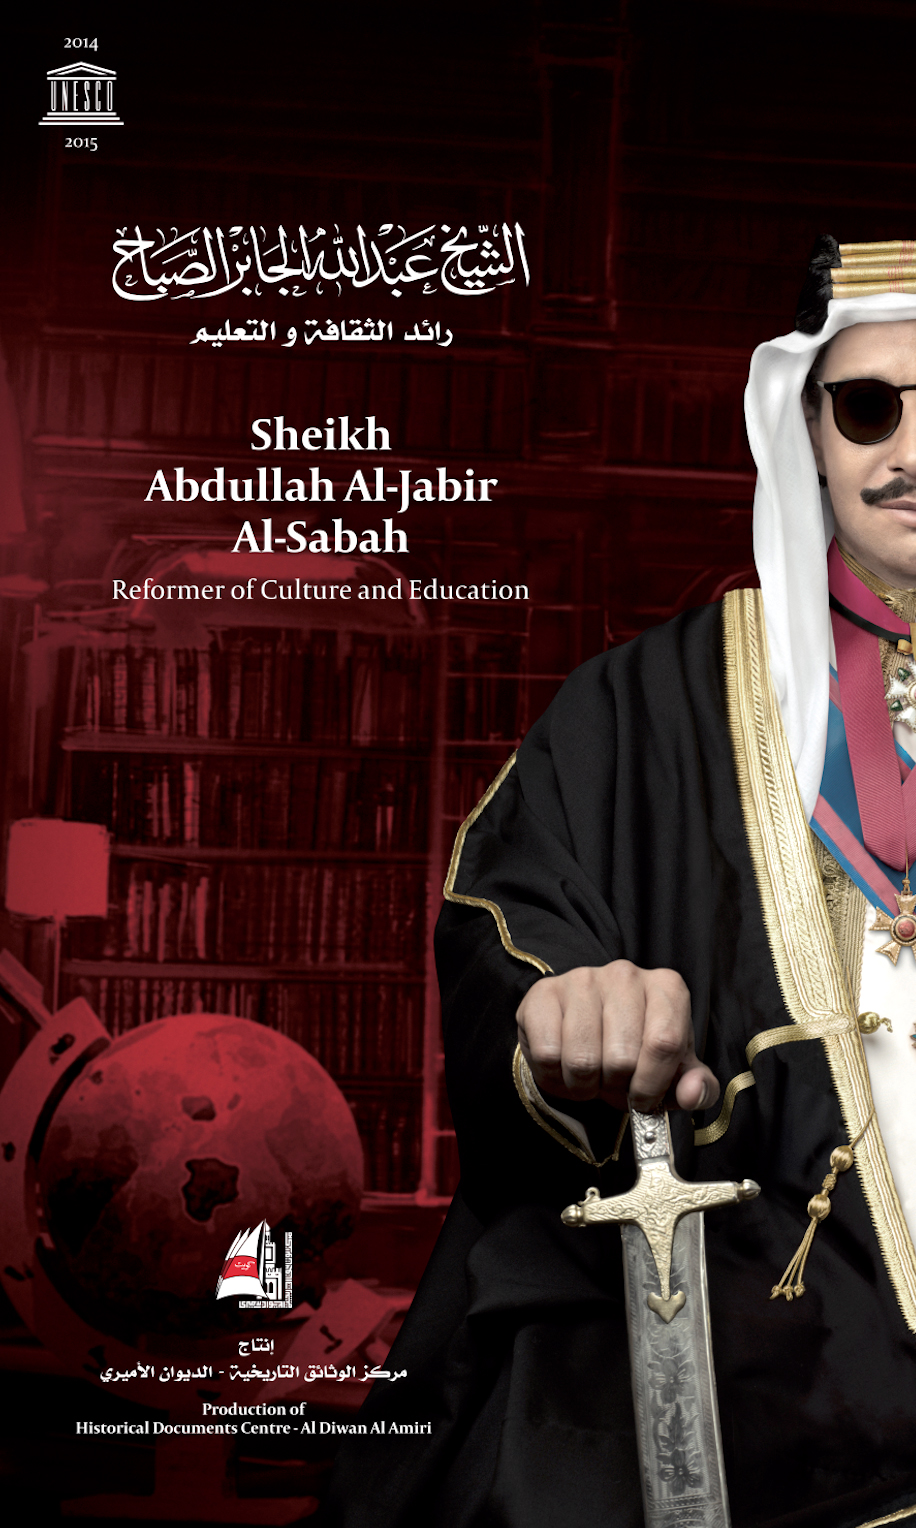 The late Sheikh Abdullah Al-Jaber Al-Sabah as a global personality in the realms of culture and education